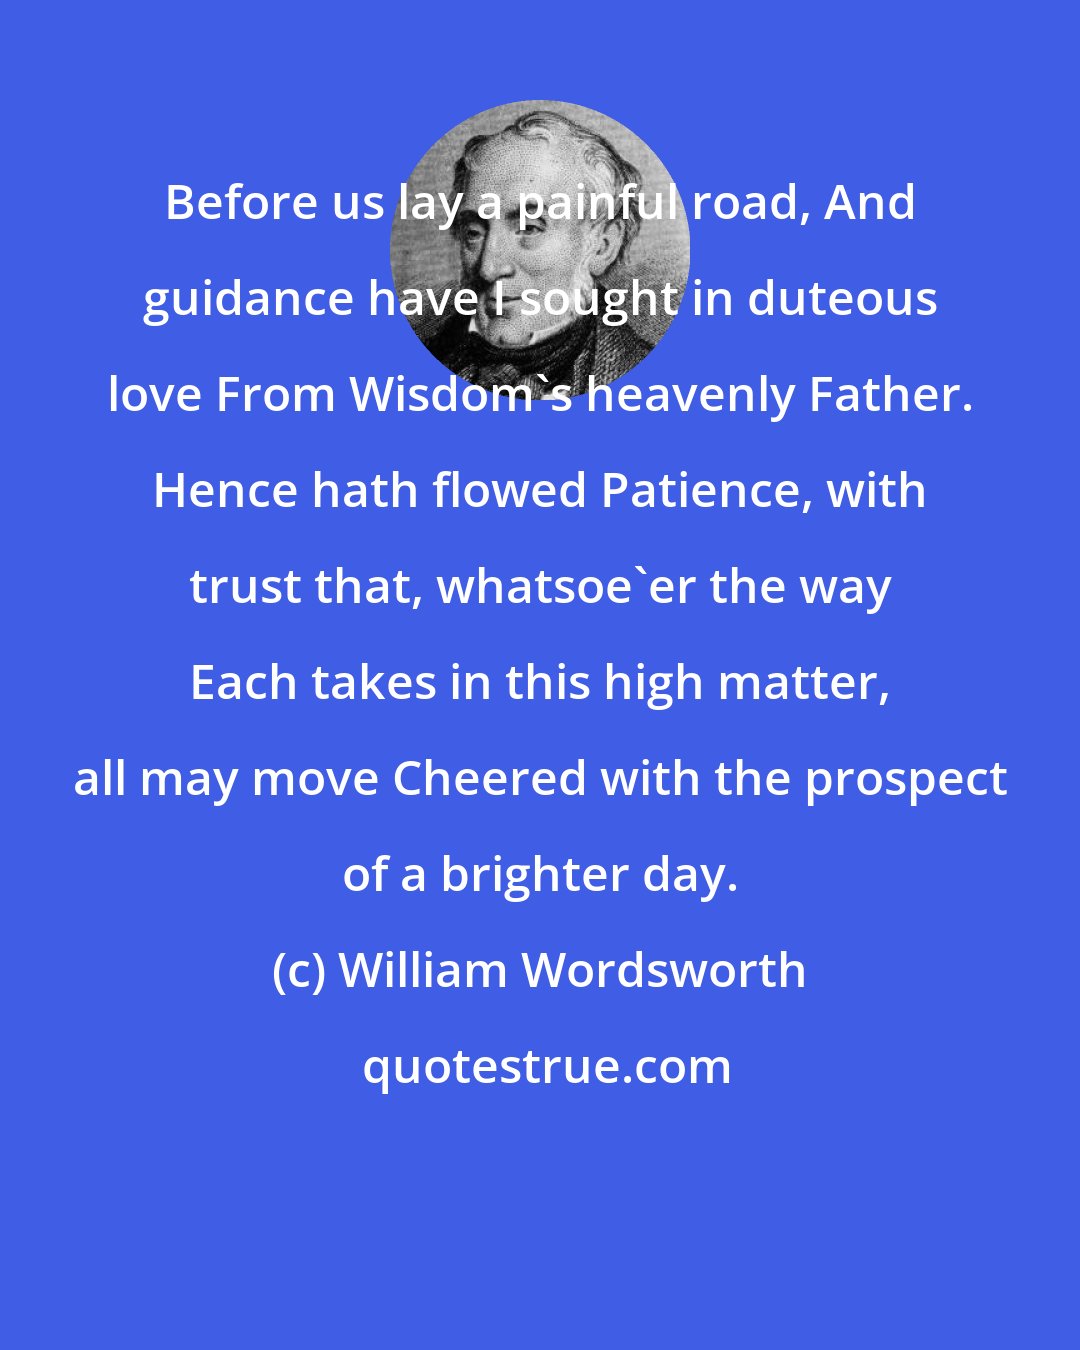 William Wordsworth: Before us lay a painful road, And guidance have I sought in duteous love From Wisdom's heavenly Father. Hence hath flowed Patience, with trust that, whatsoe'er the way Each takes in this high matter, all may move Cheered with the prospect of a brighter day.